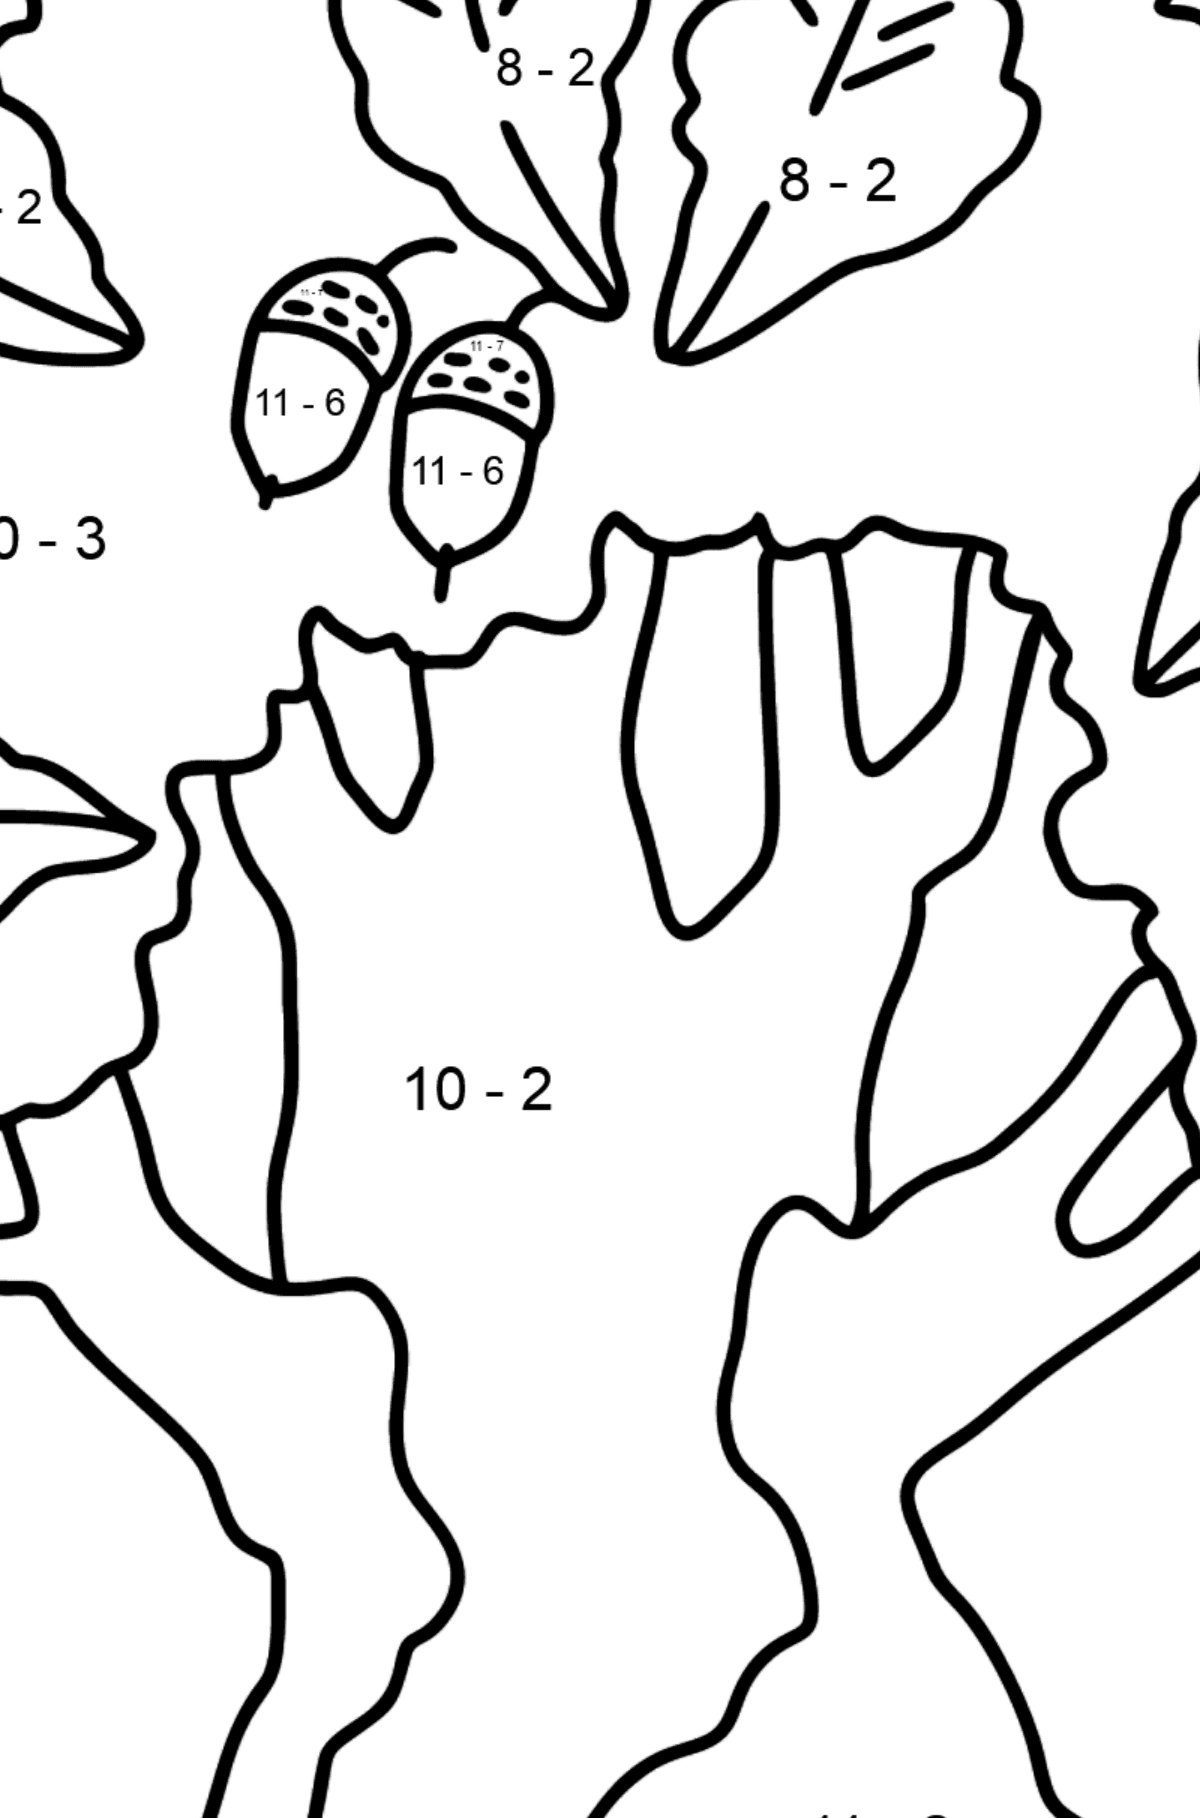 Oak coloring page - Difficult - Math Coloring - Subtraction for Kids